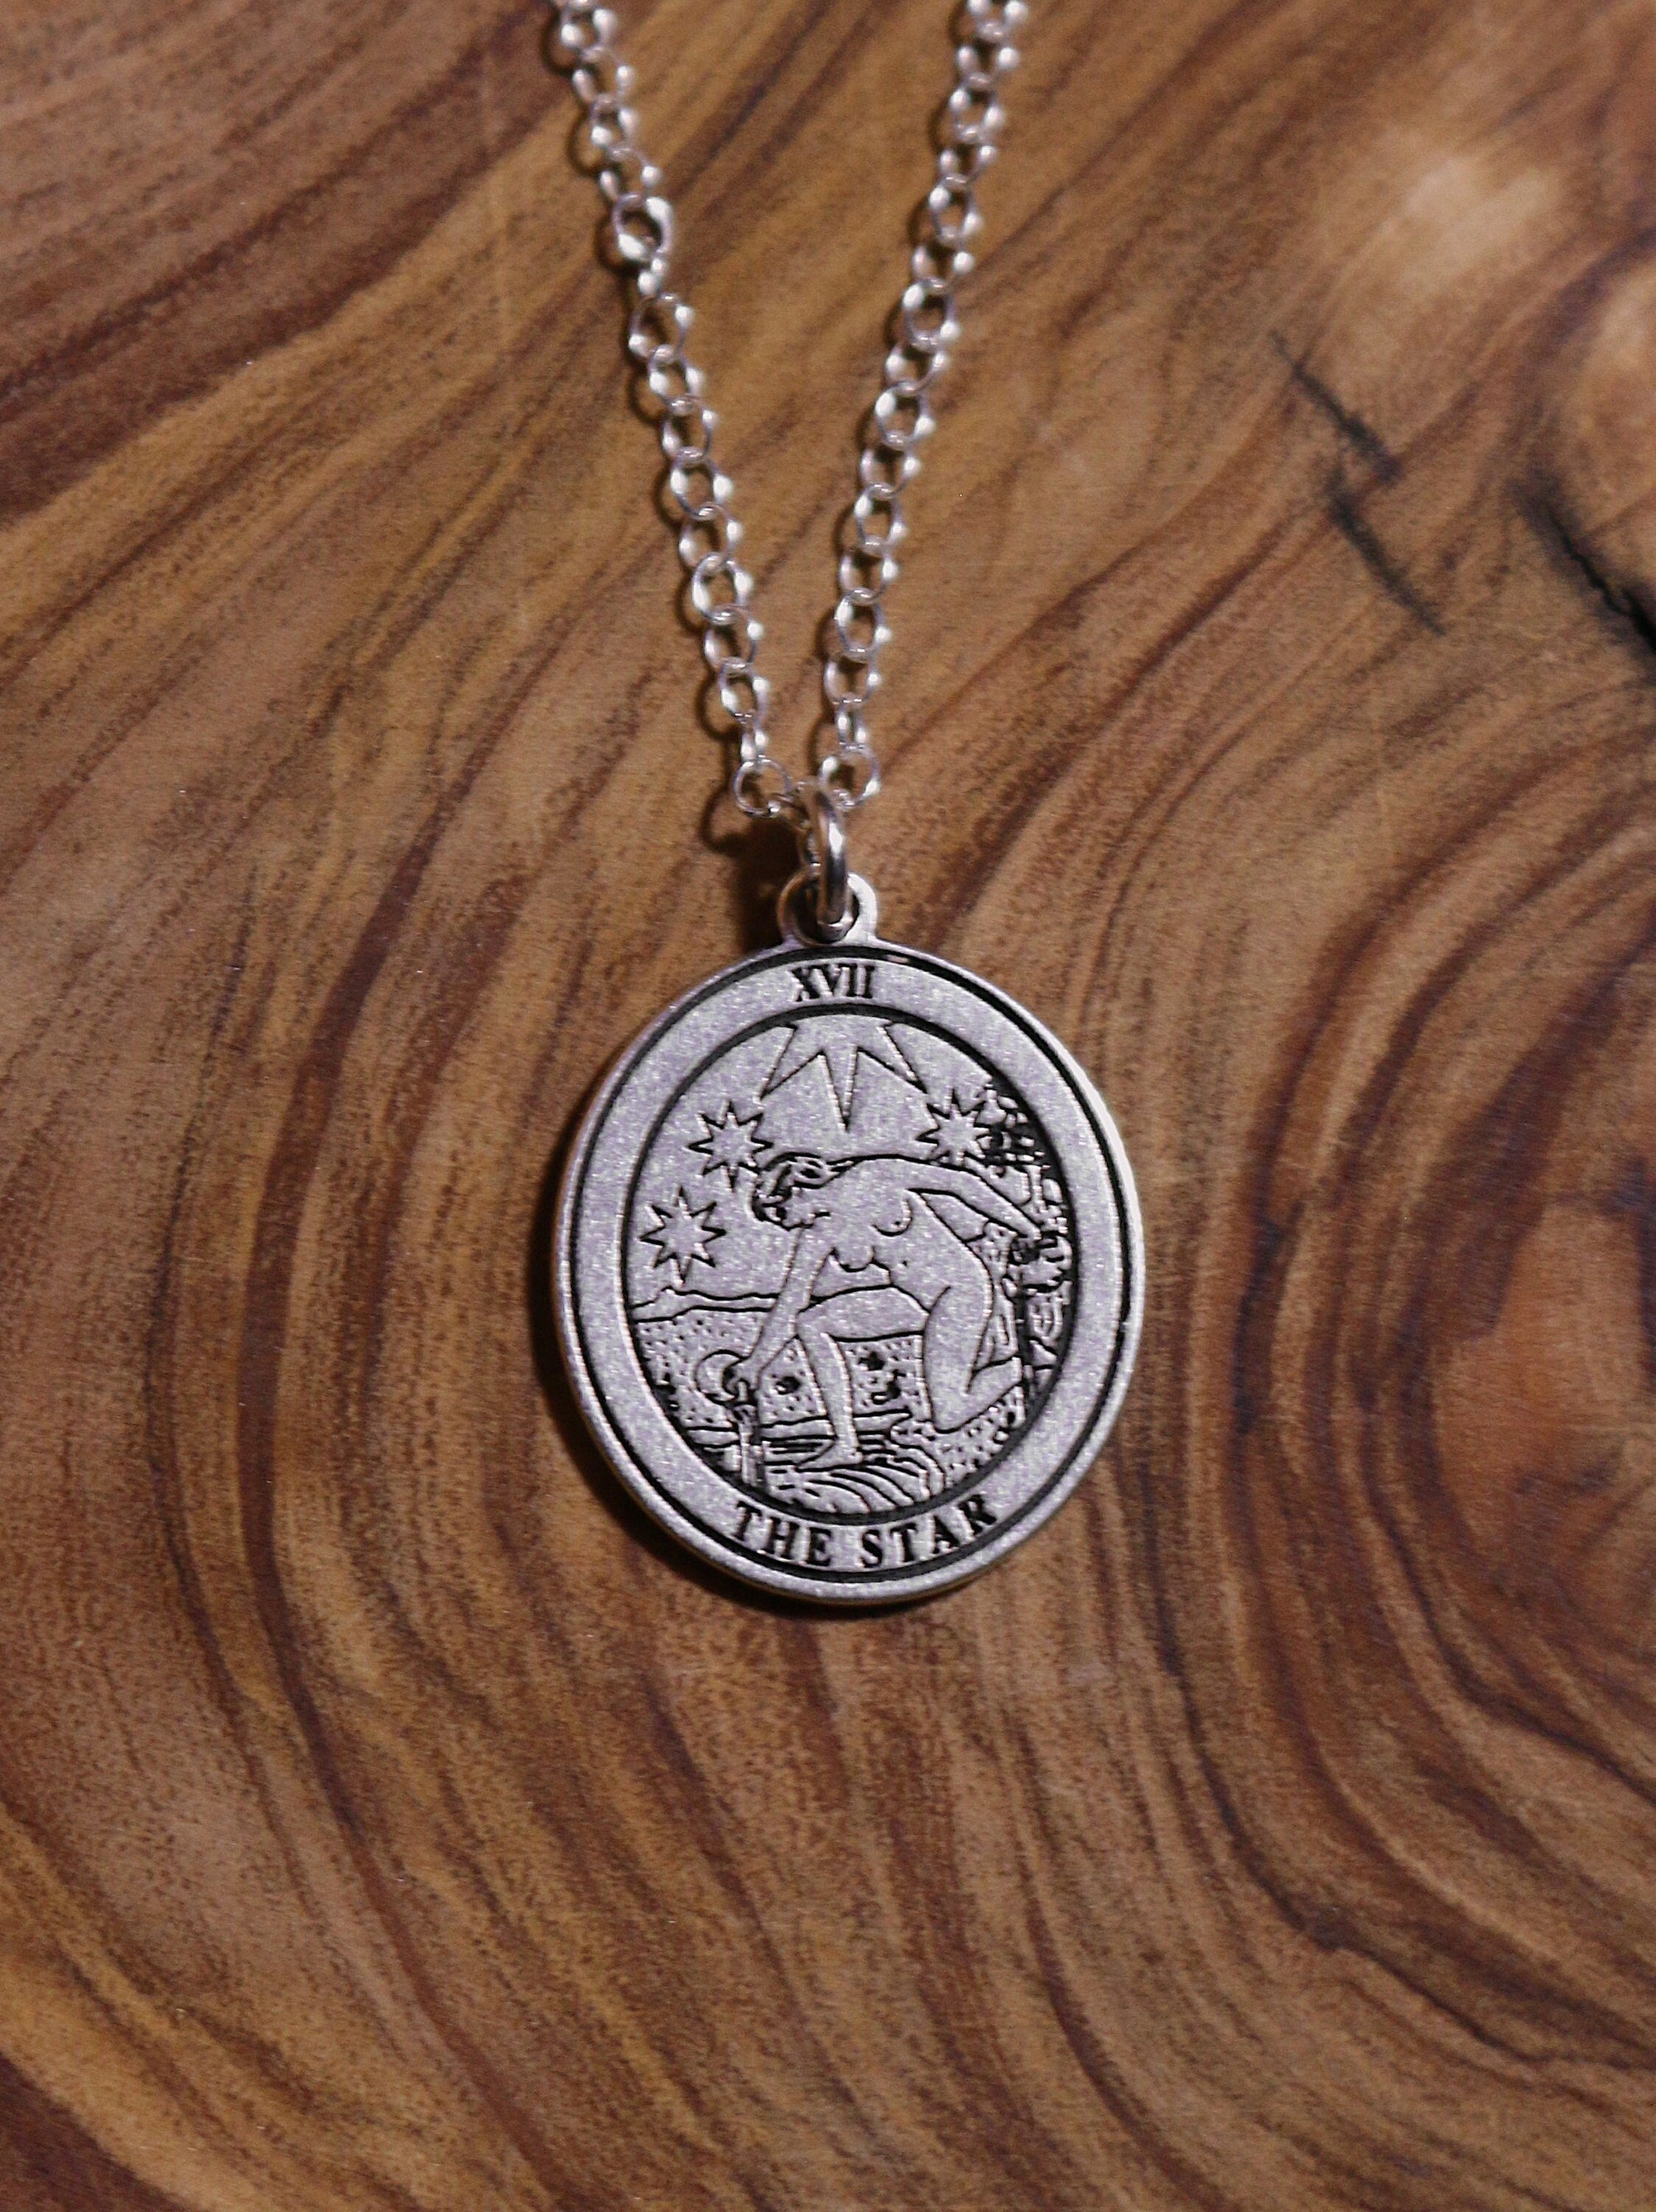 Round The Star Tarot Card Necklace | Best Friend Birthday Gift | Tarot Card Necklace | Celestial Mystic Jewelry | Dainty Witch Necklace